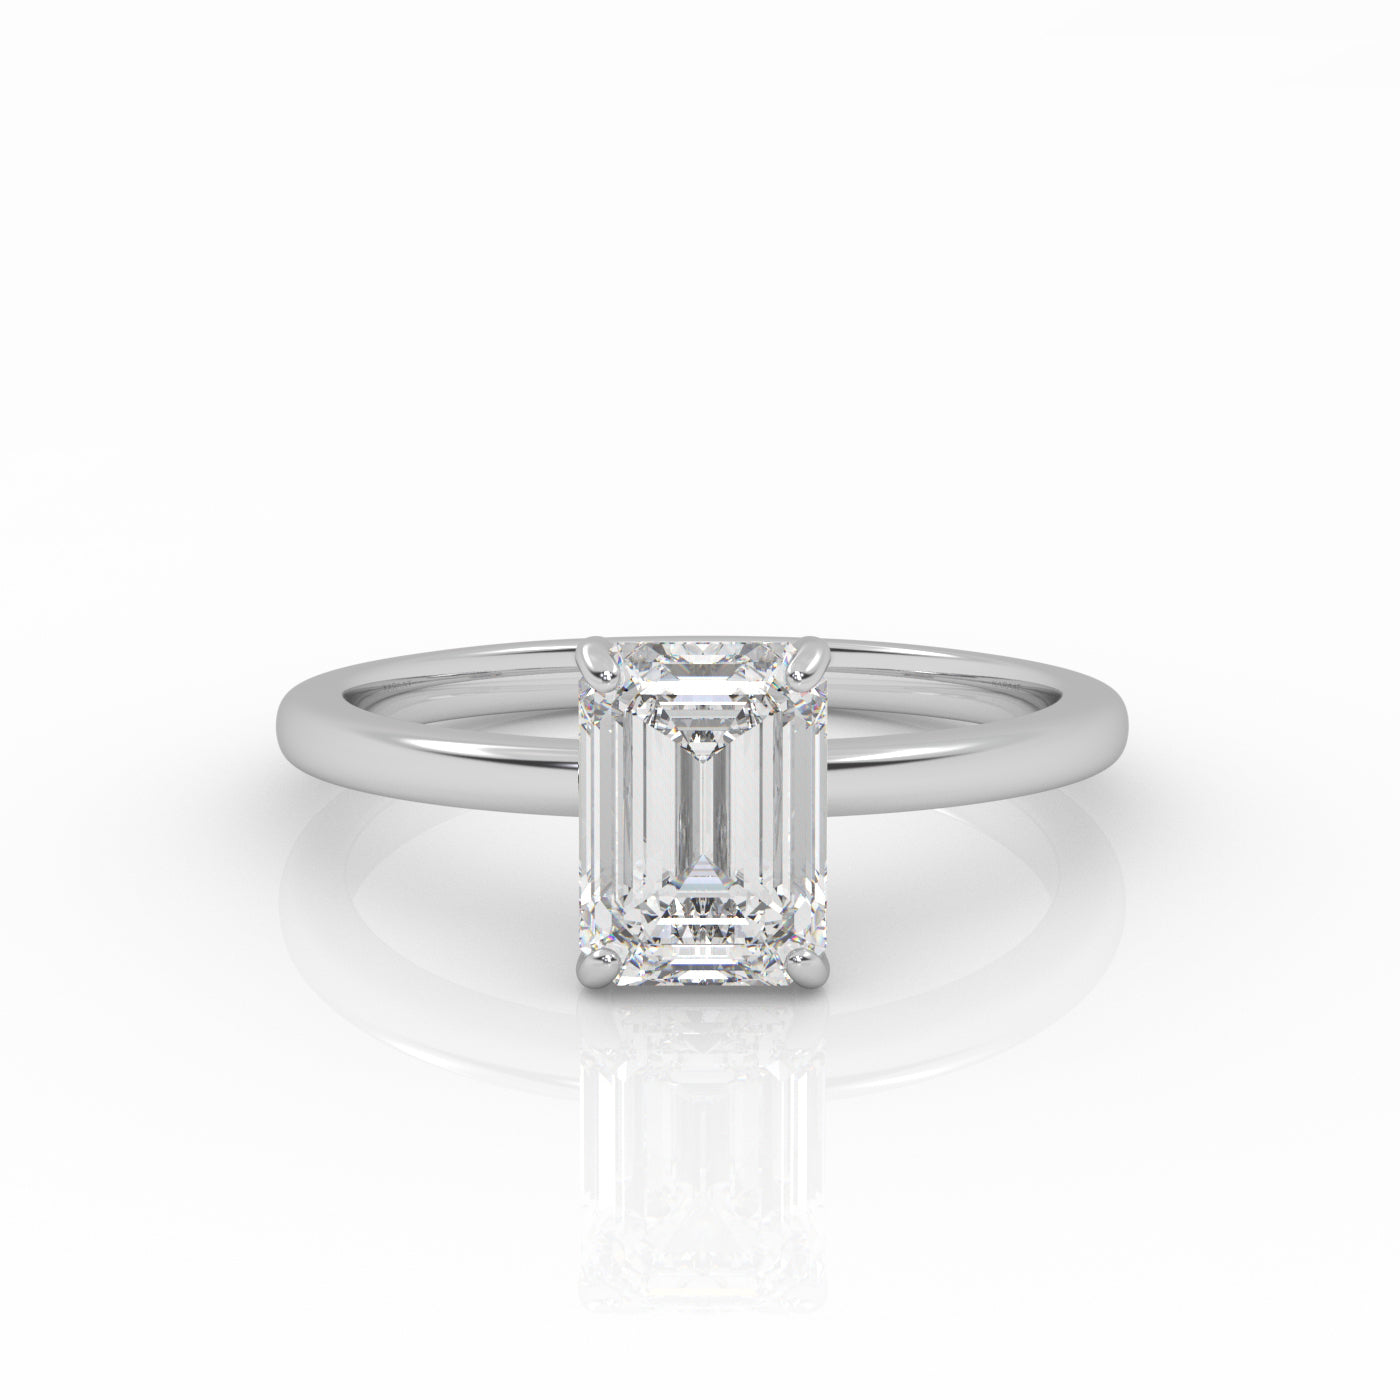 Elegant Emerald Solitaire engagement ring, crafted from ethical 1-carat lab-grown diamond and 18k white gold. 